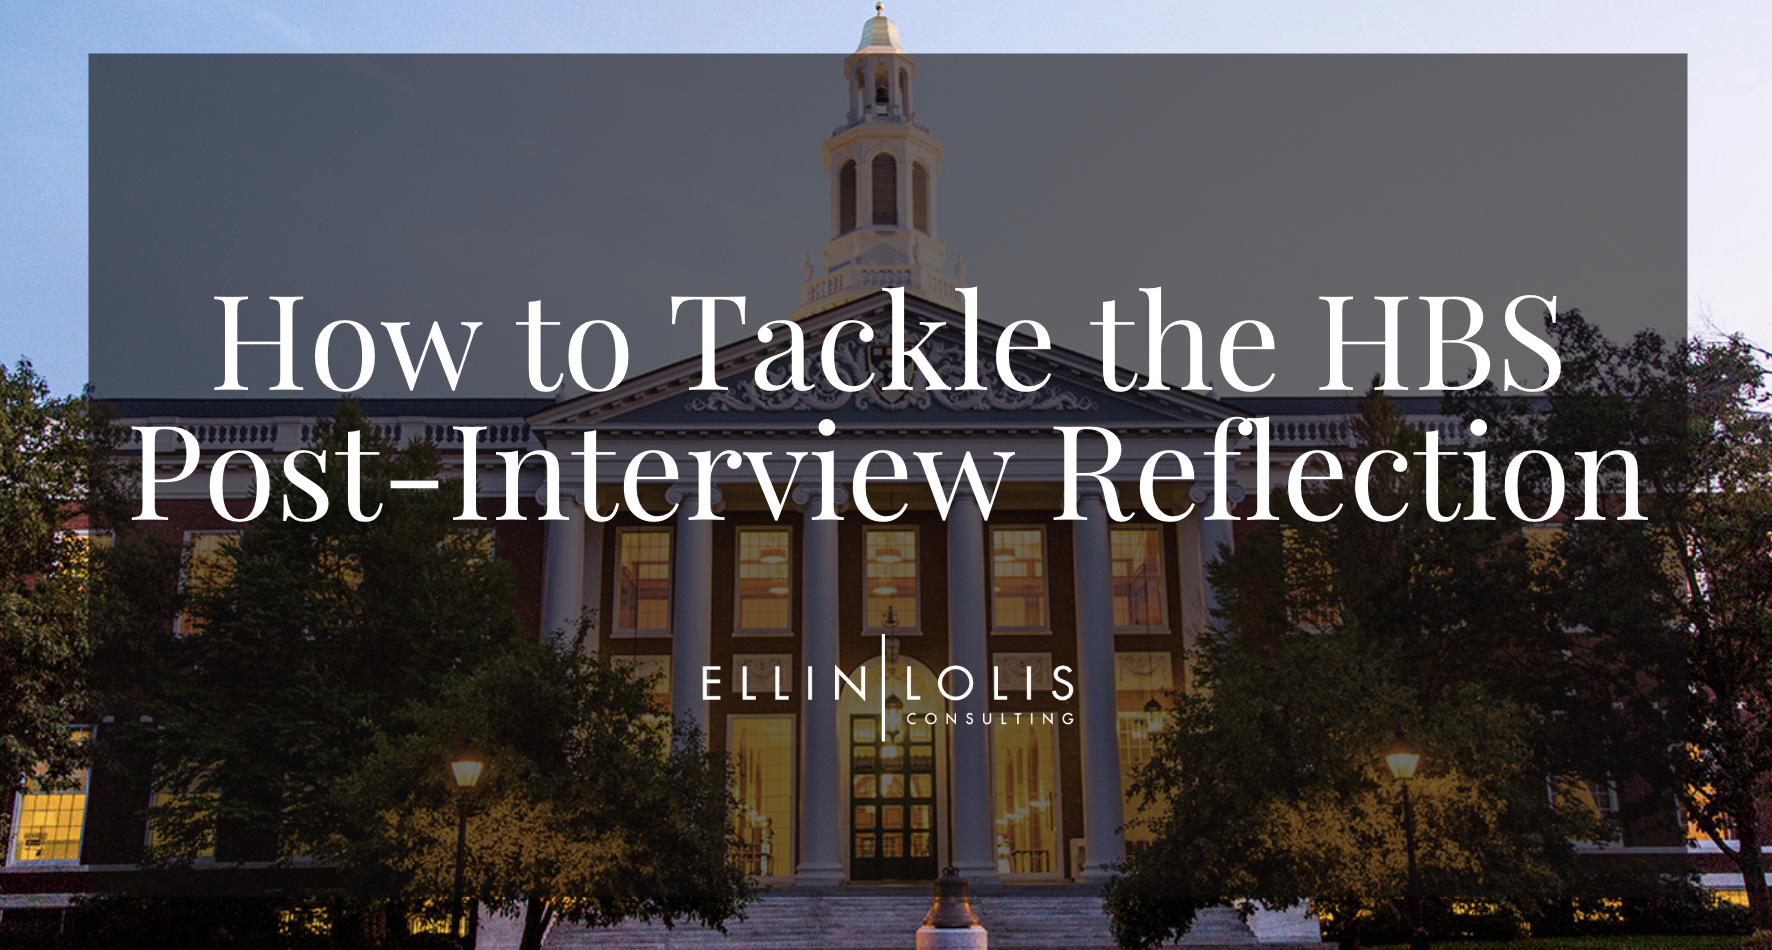 How To Tackle the HBS Post-Interview Reflection